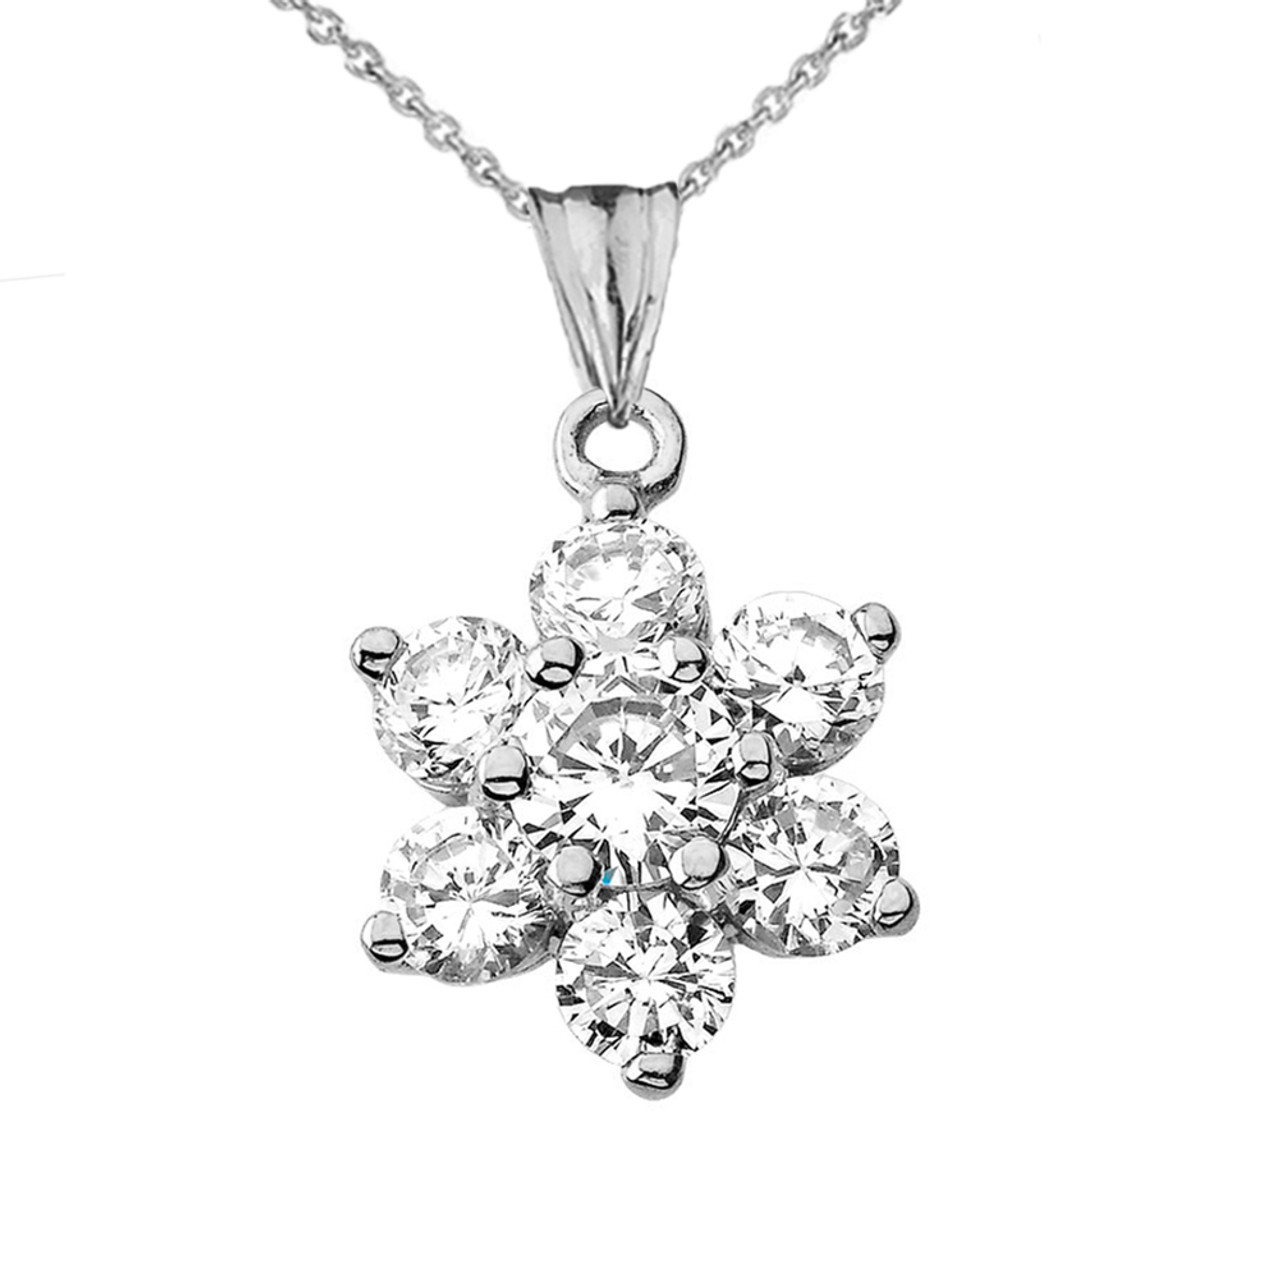 Onefeart Platinum Plated Pendant Necklace for Women Marquise Cubic Zirconia Music Style Lover Gift Elegant Necklace 41CM White Gold 